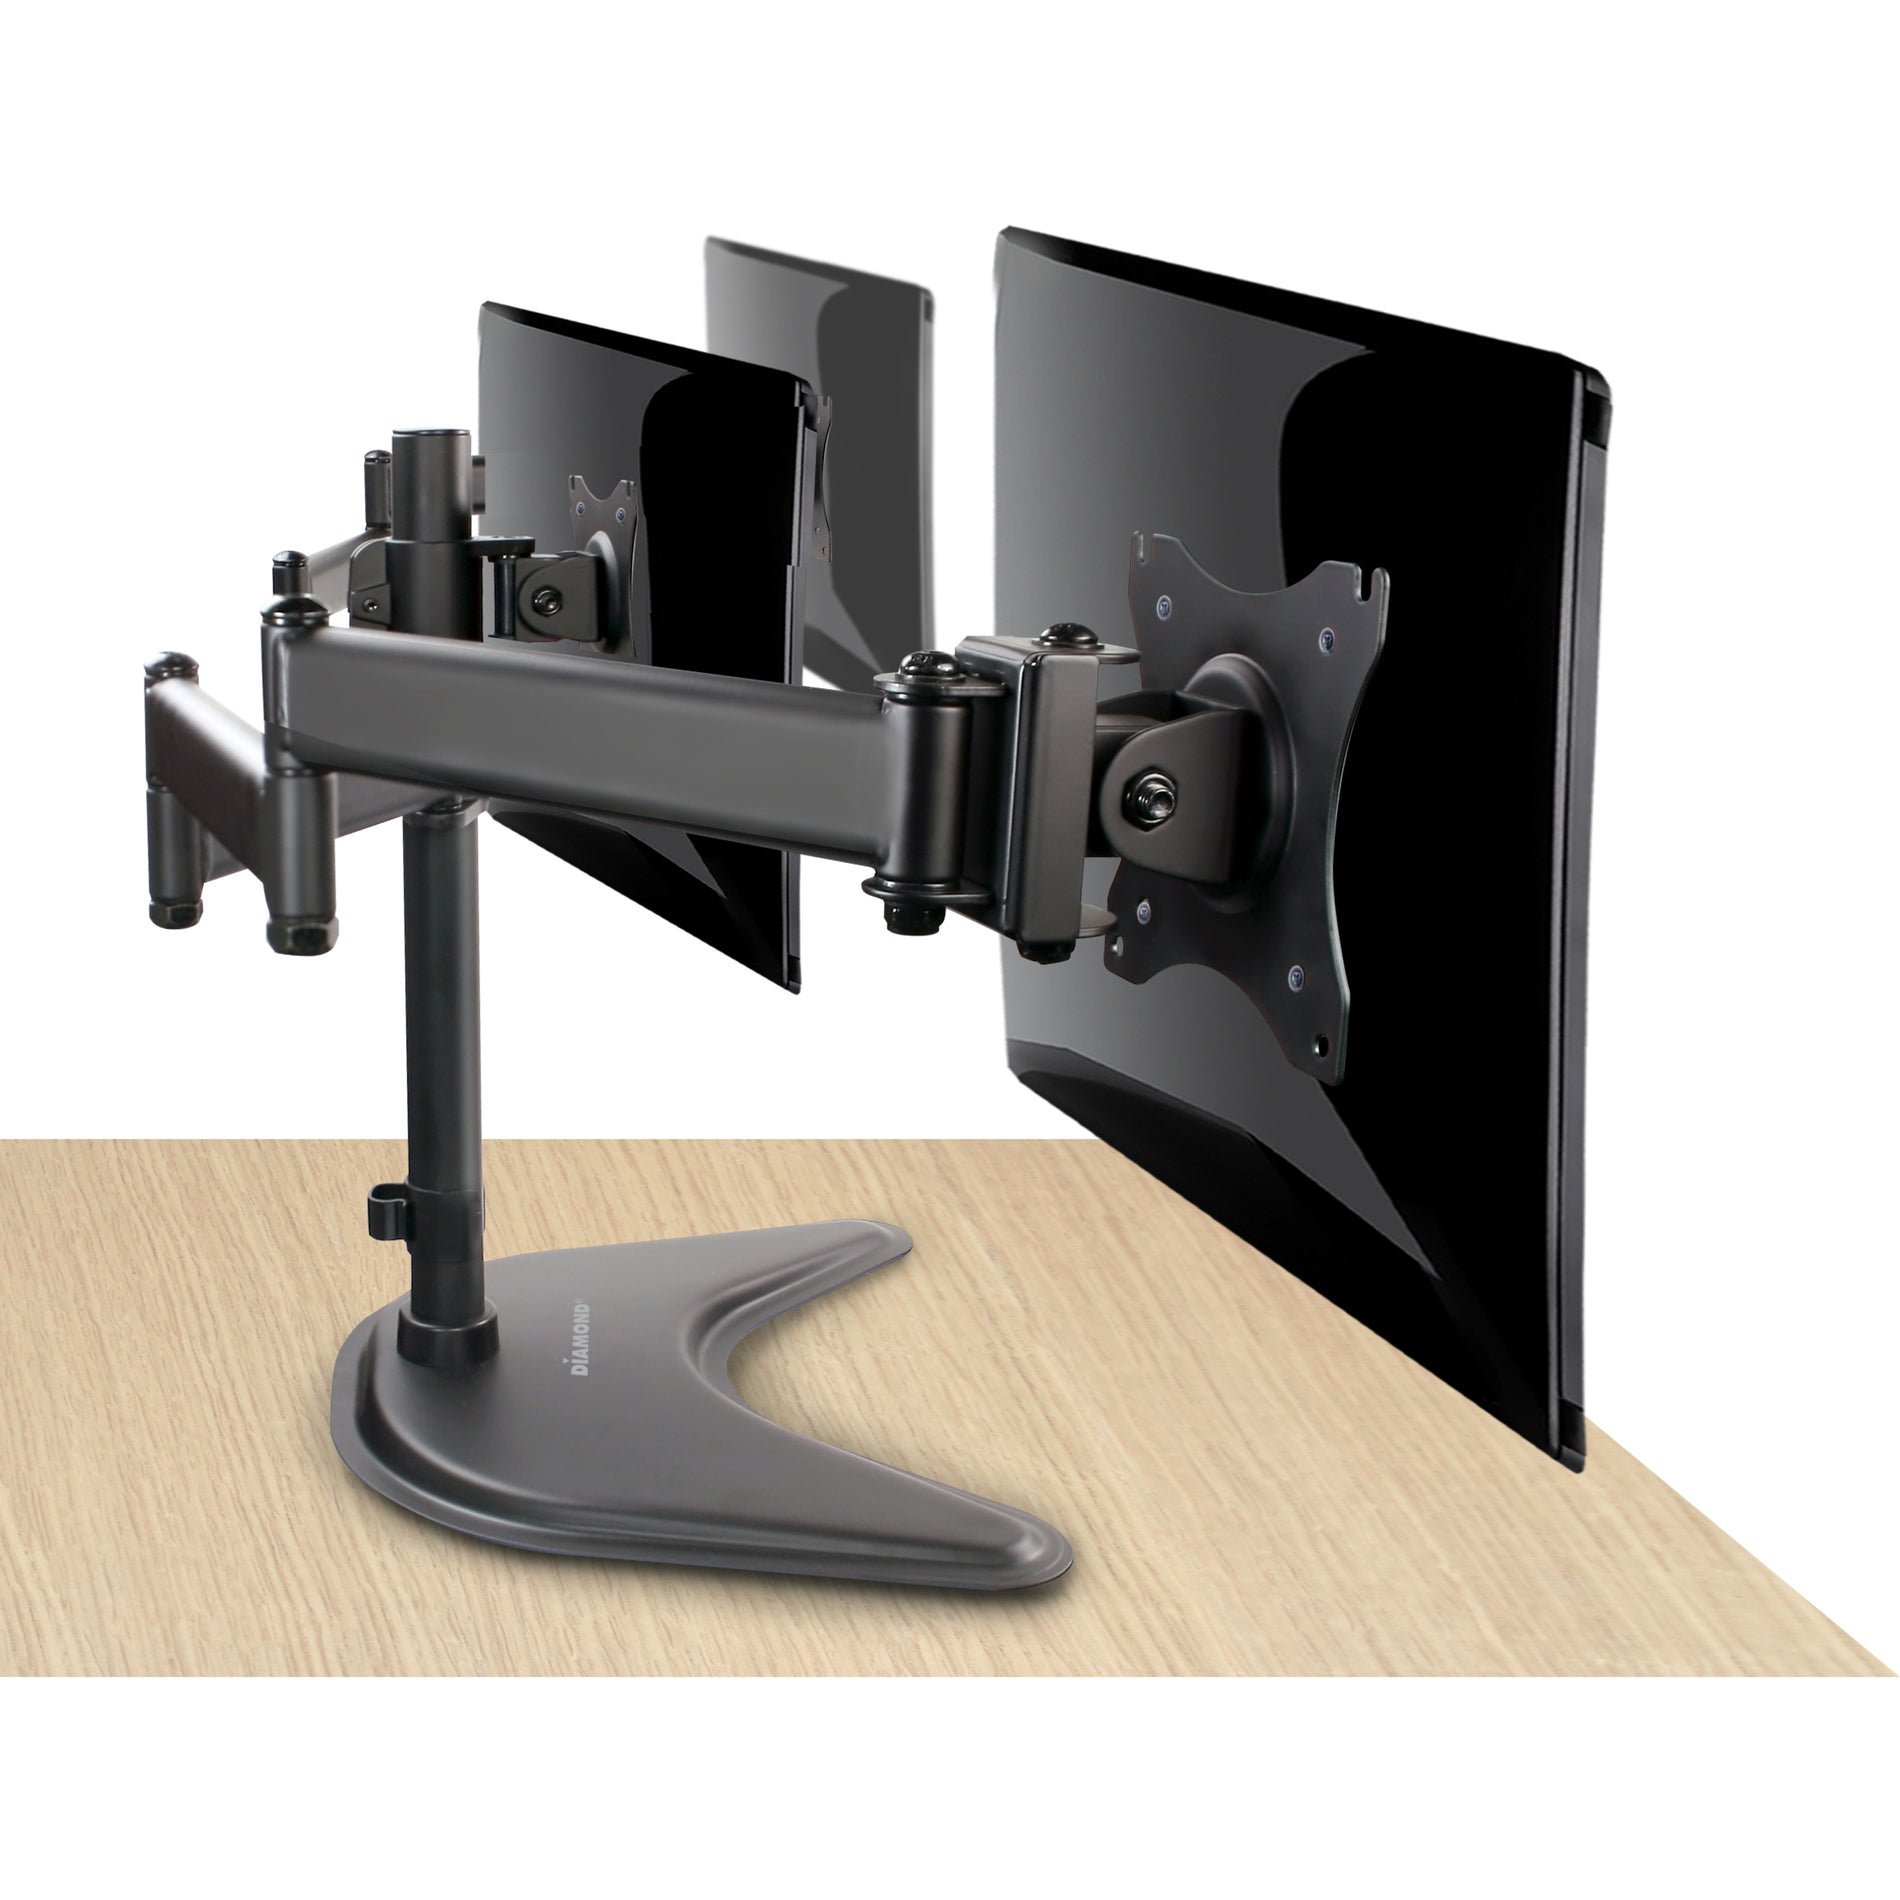 DIAMOND DMTA310 Ergonomic Articulating Triple Arm Display Table Top Mount, 360° Swivel, Cable Management, Height Adjustable [Discontinued]